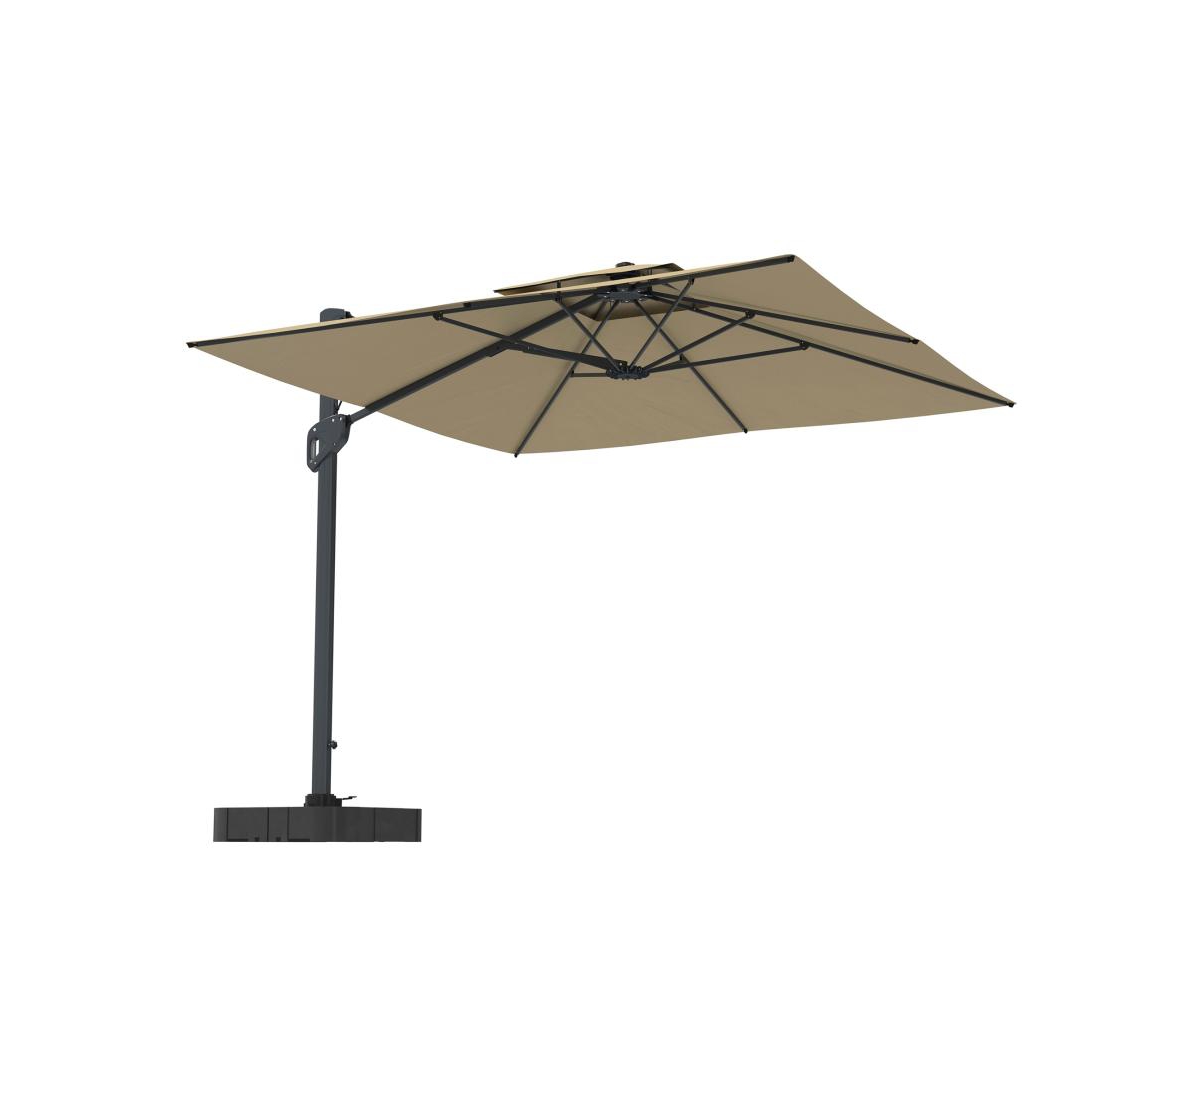 10ft Square Offset Cantilever Outdoor Patio Umbrella with Included Base - Dark gray